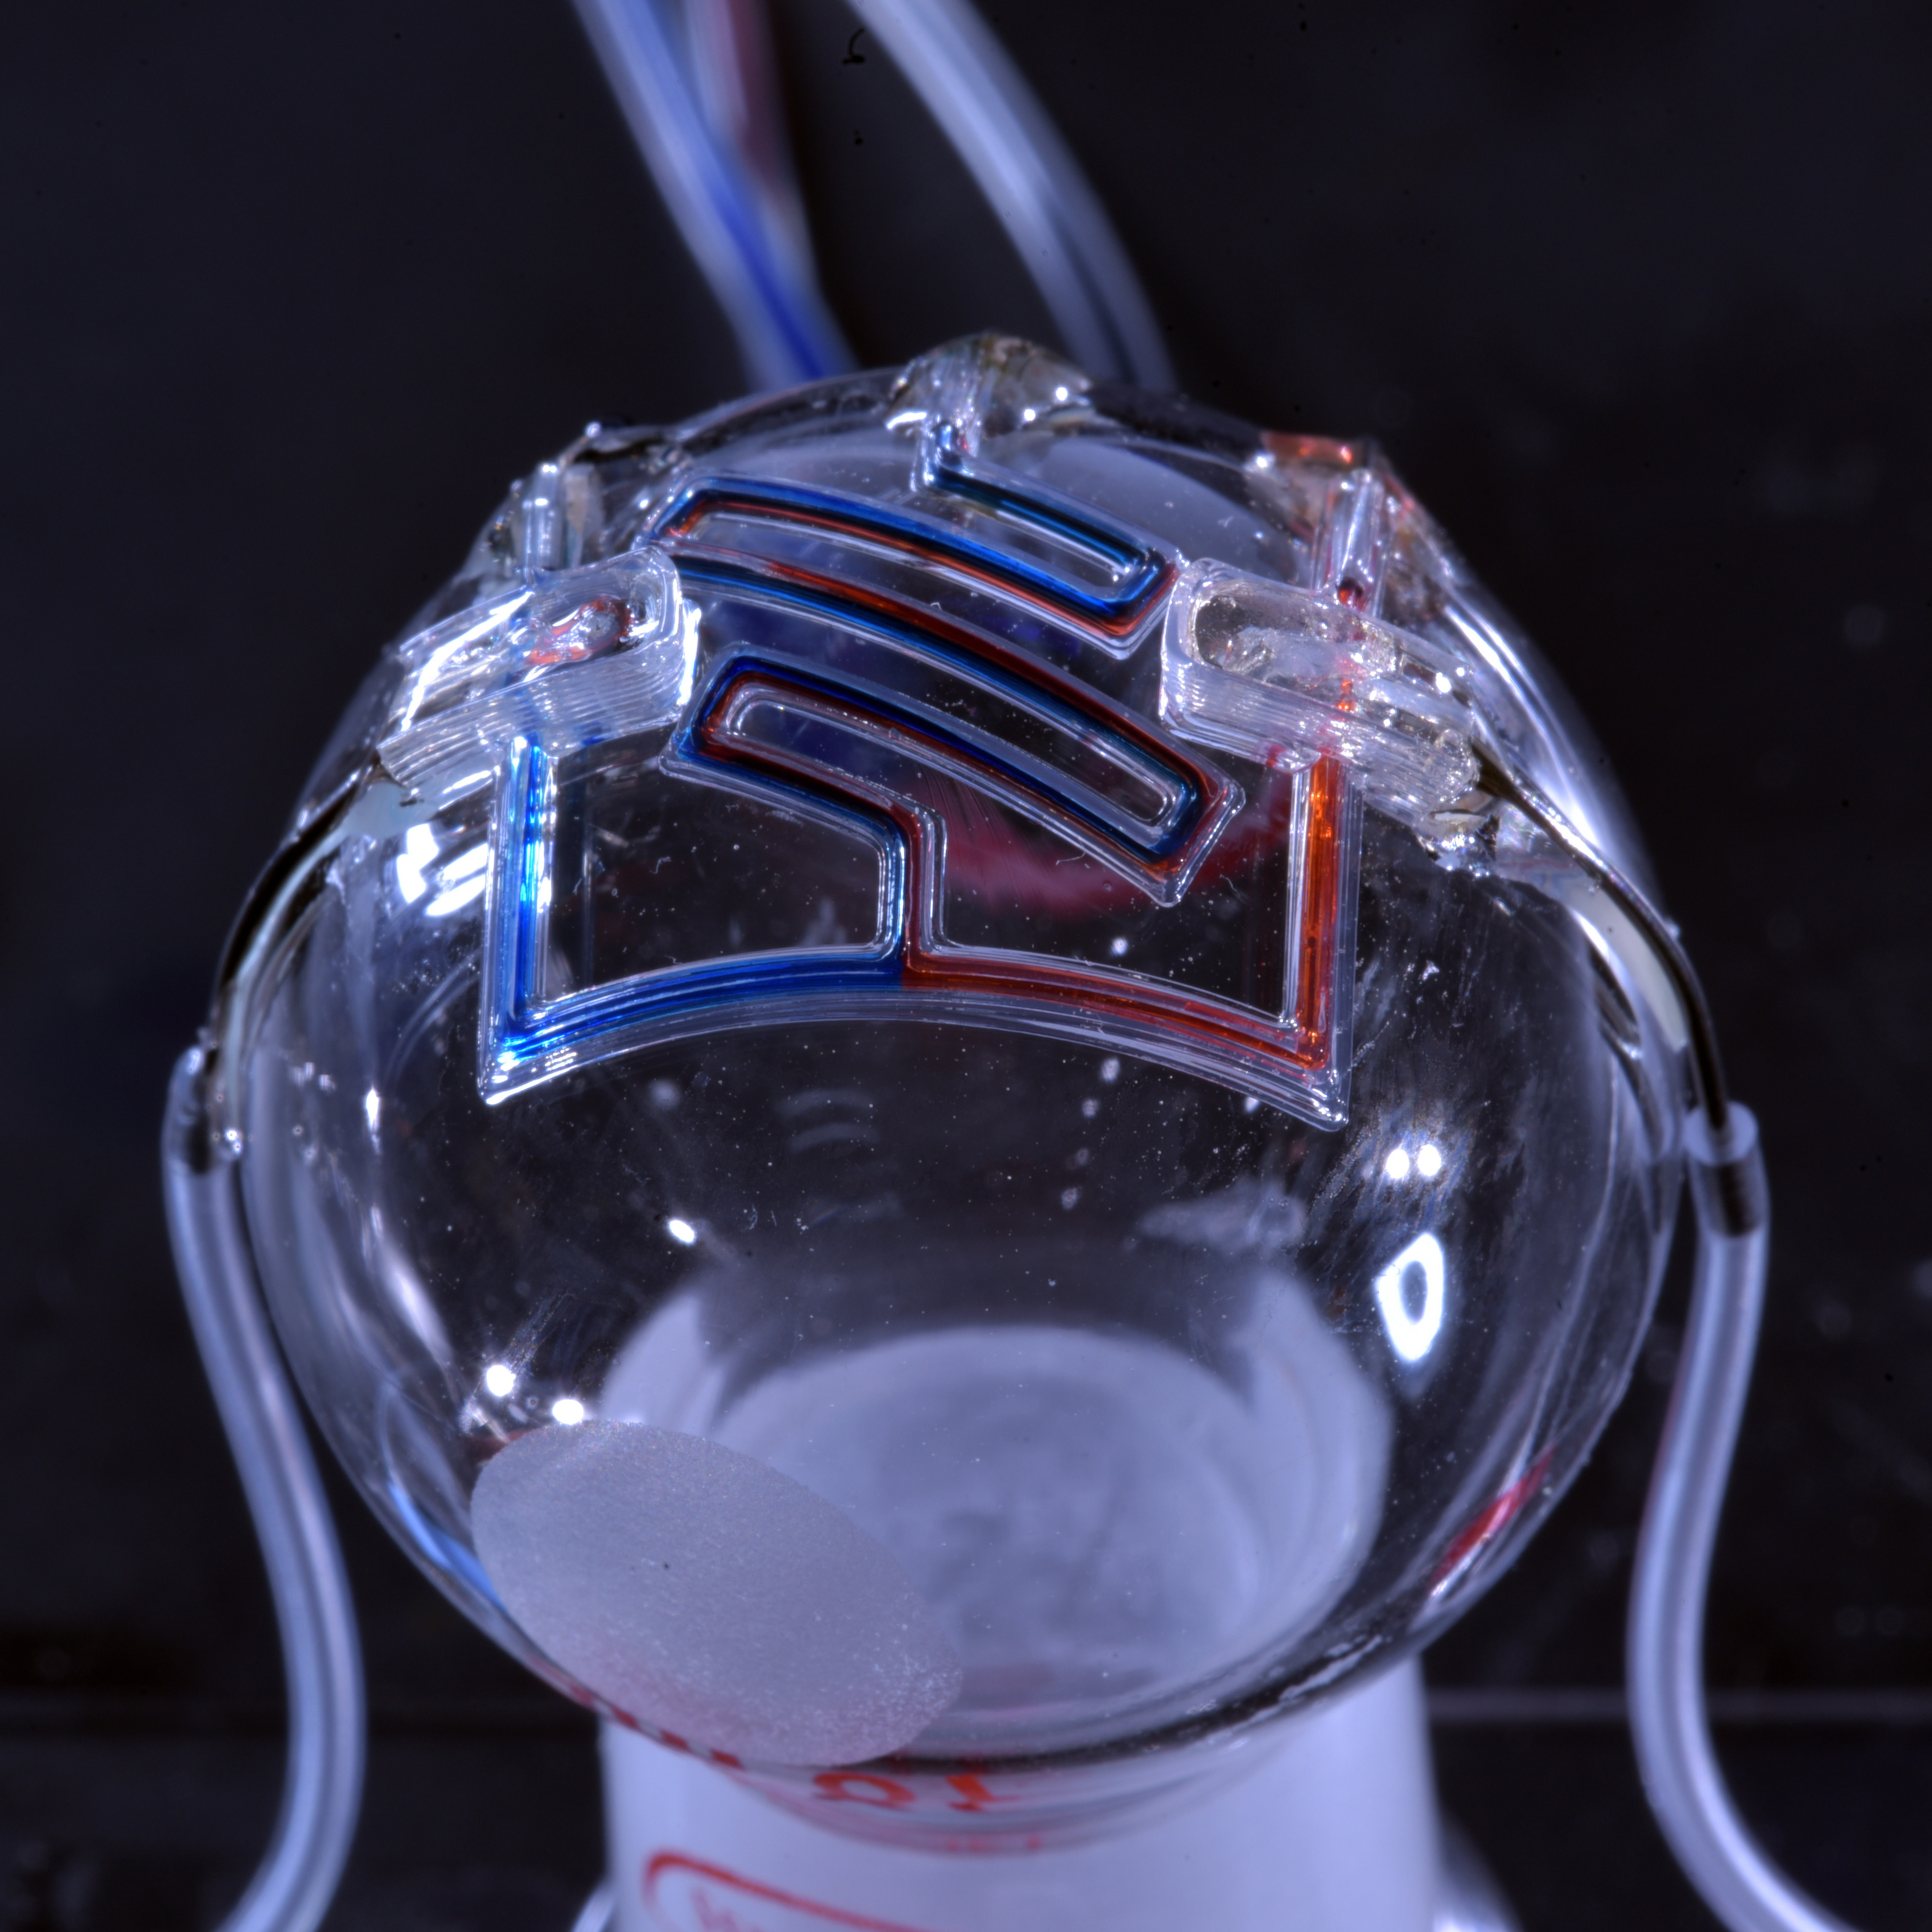 Michael McAlpine's group is first to 3D print microfluidic channels on a curved surface